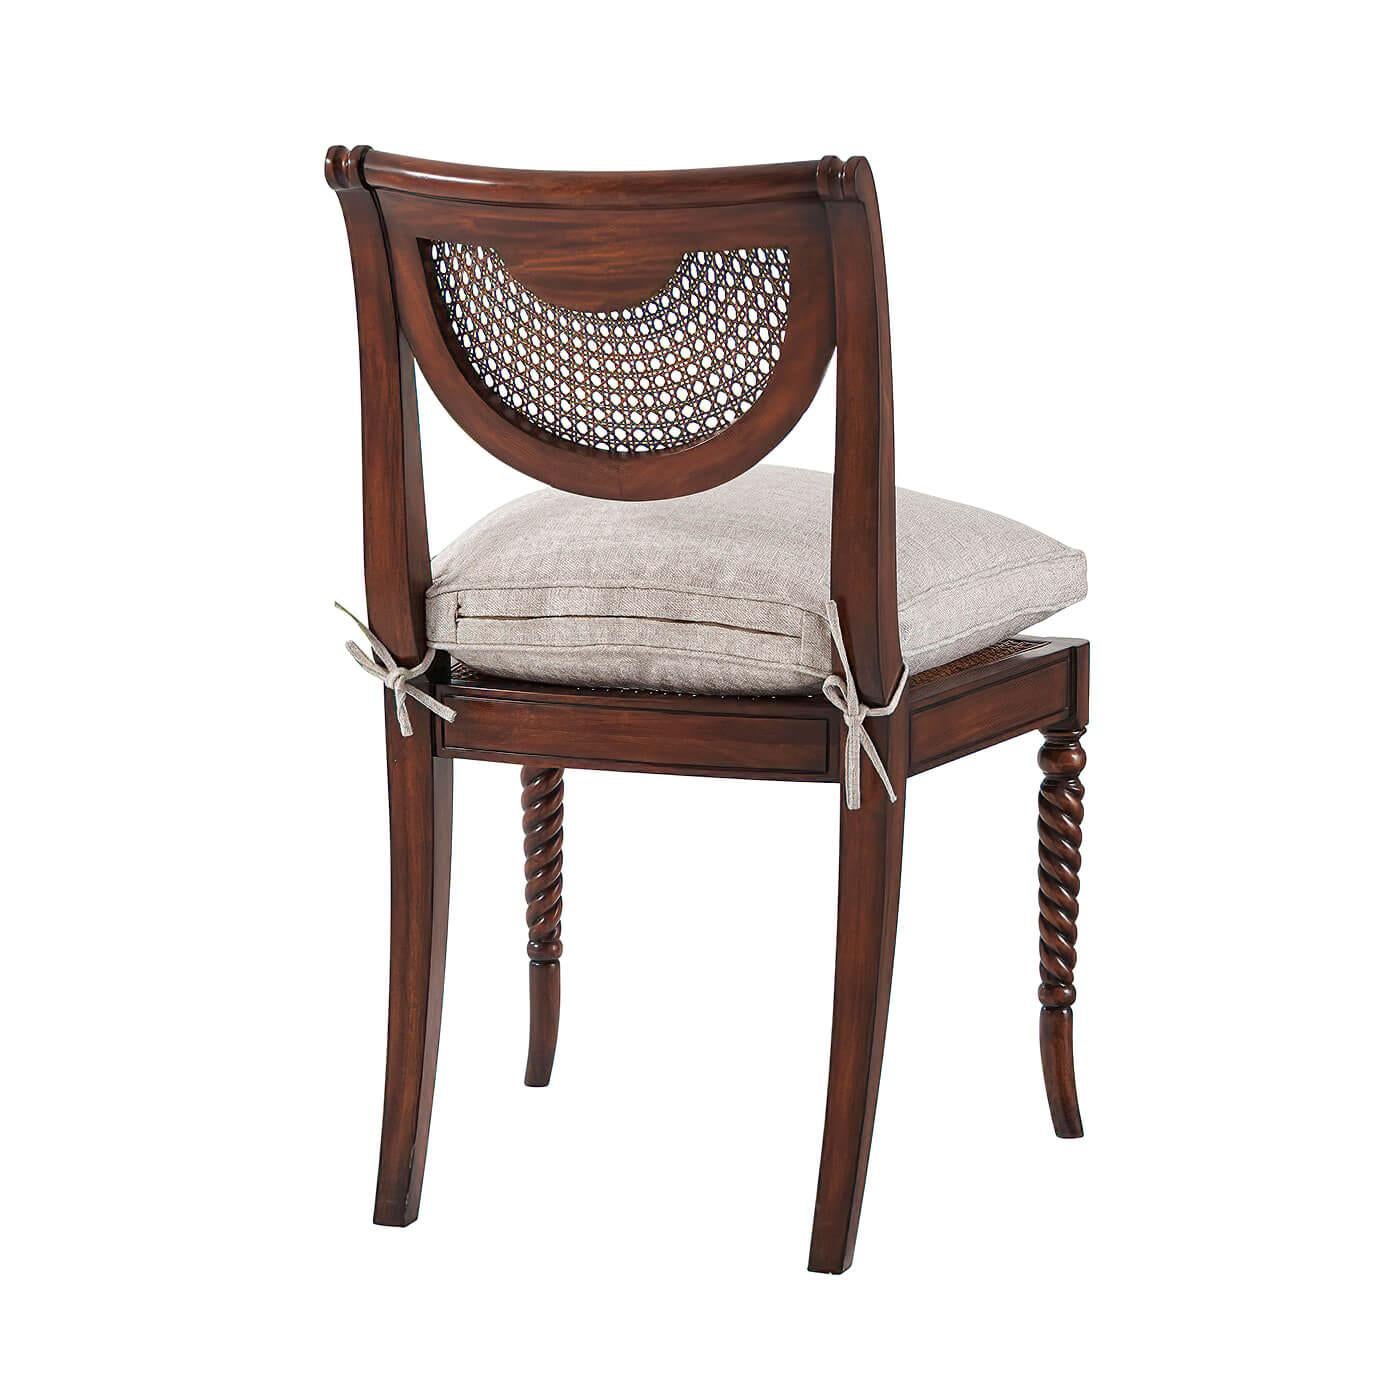 A hand-carved side chair, the verdigris brass oval inset and caned back above a silk tie on cushion seat, on spiral turned legs. The original Regency.

Dimensions: 22